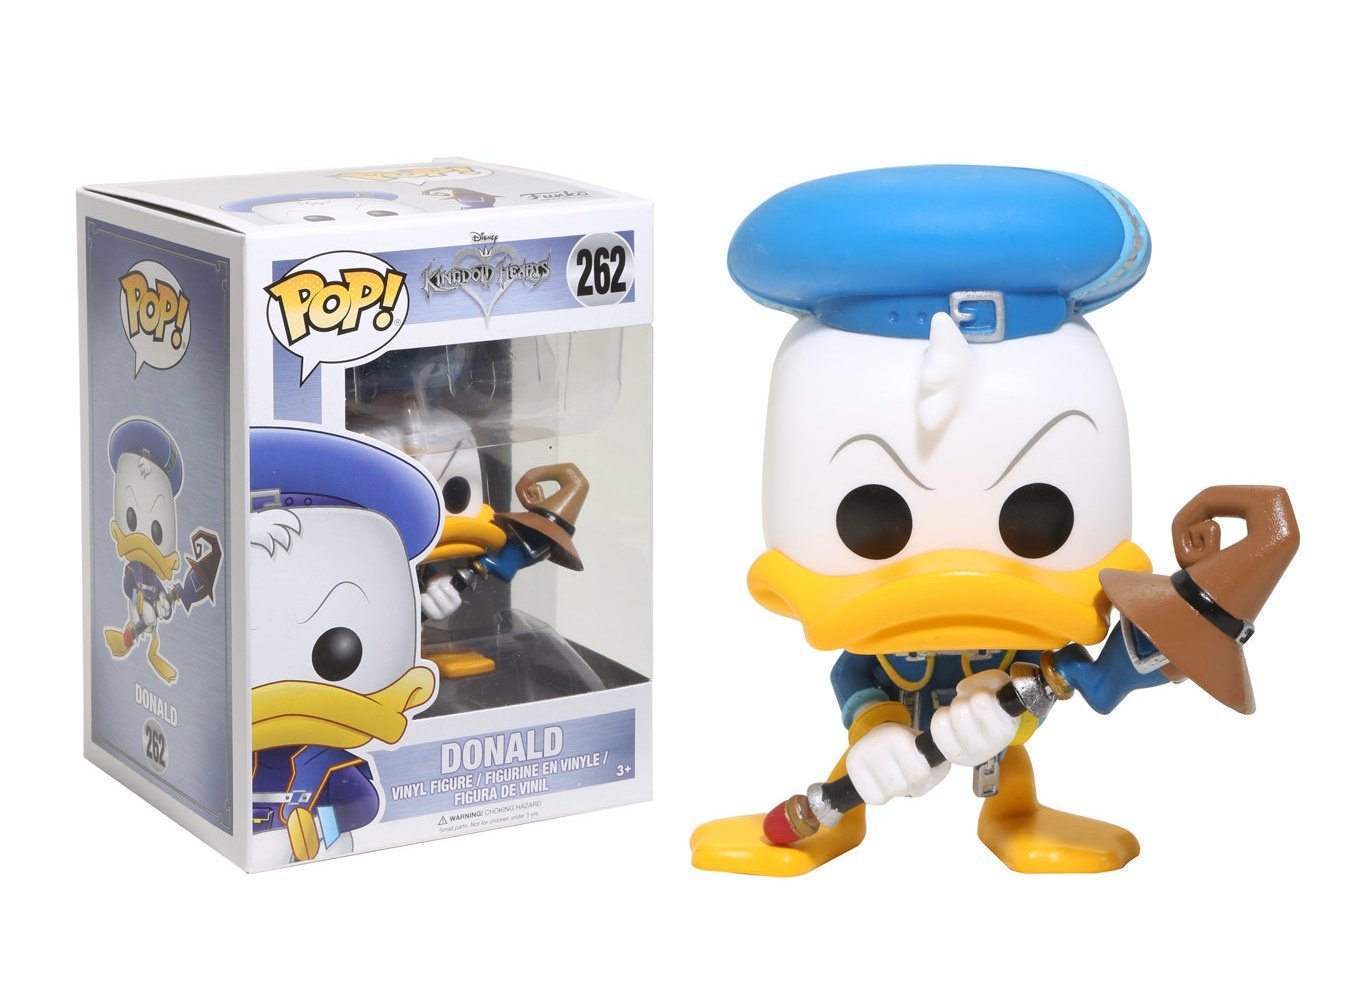 Donald Duck blasts into action in Funko Pop form